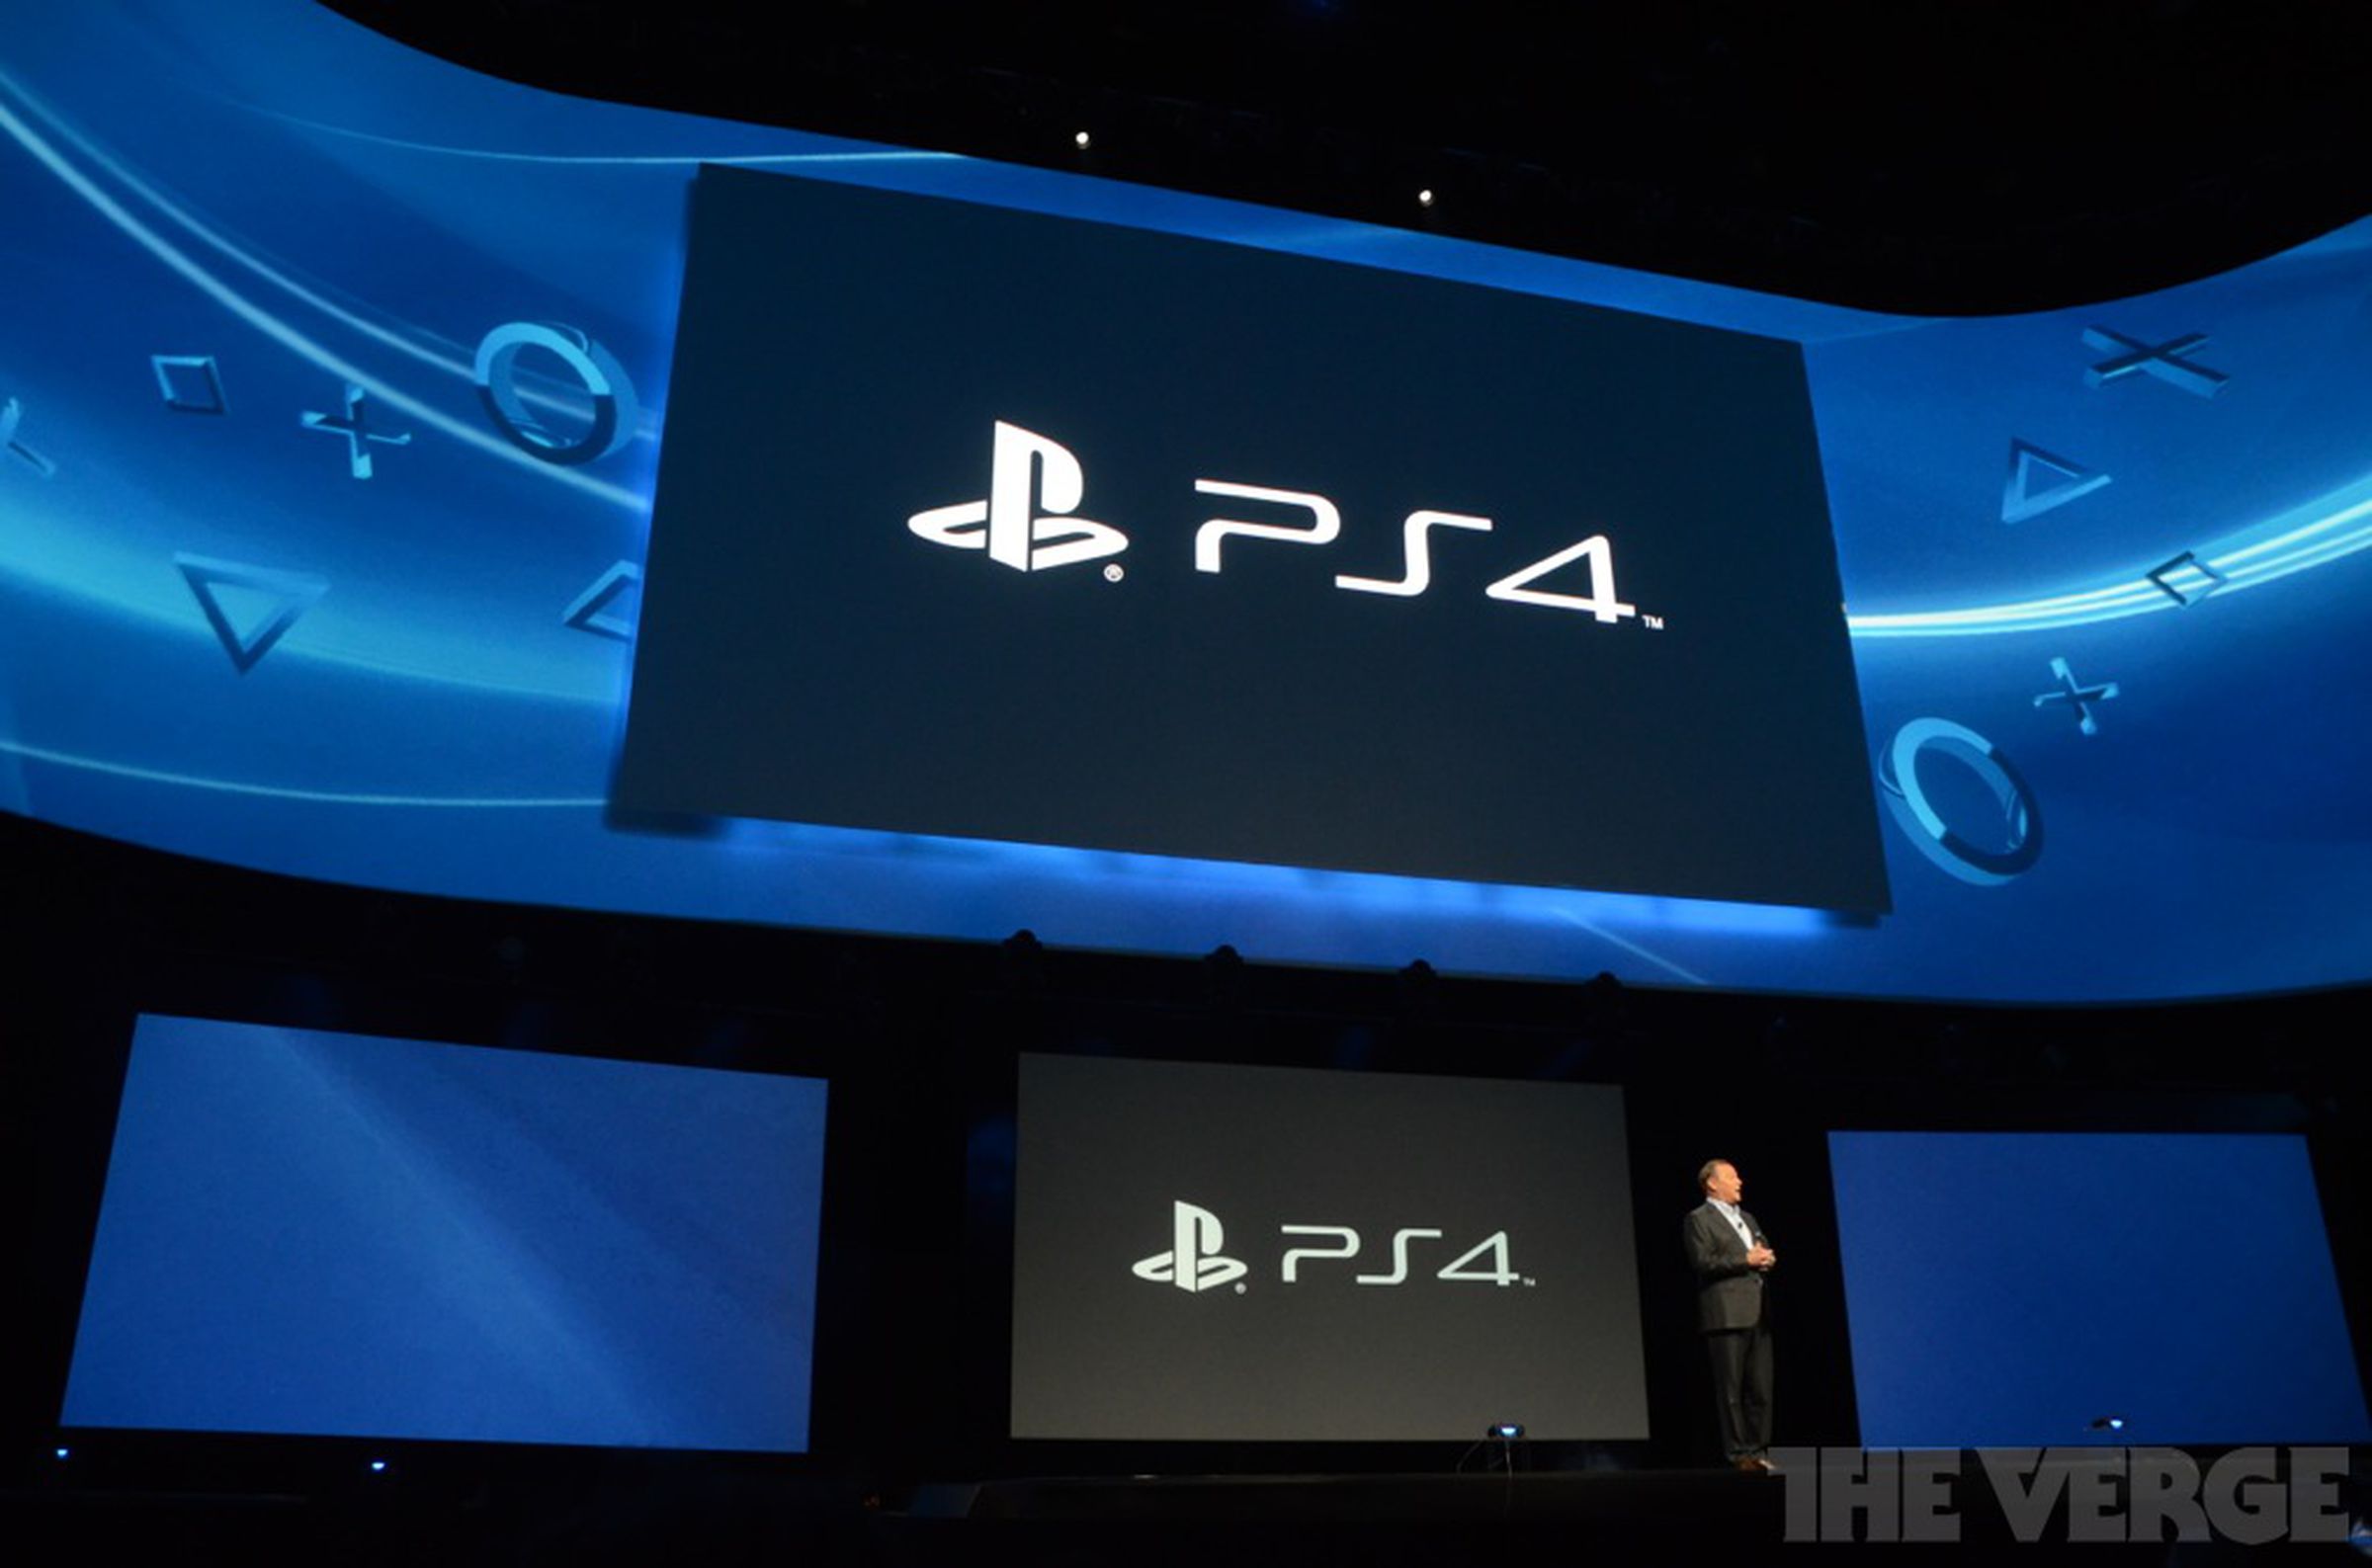 Playstation 4 hardware gallery